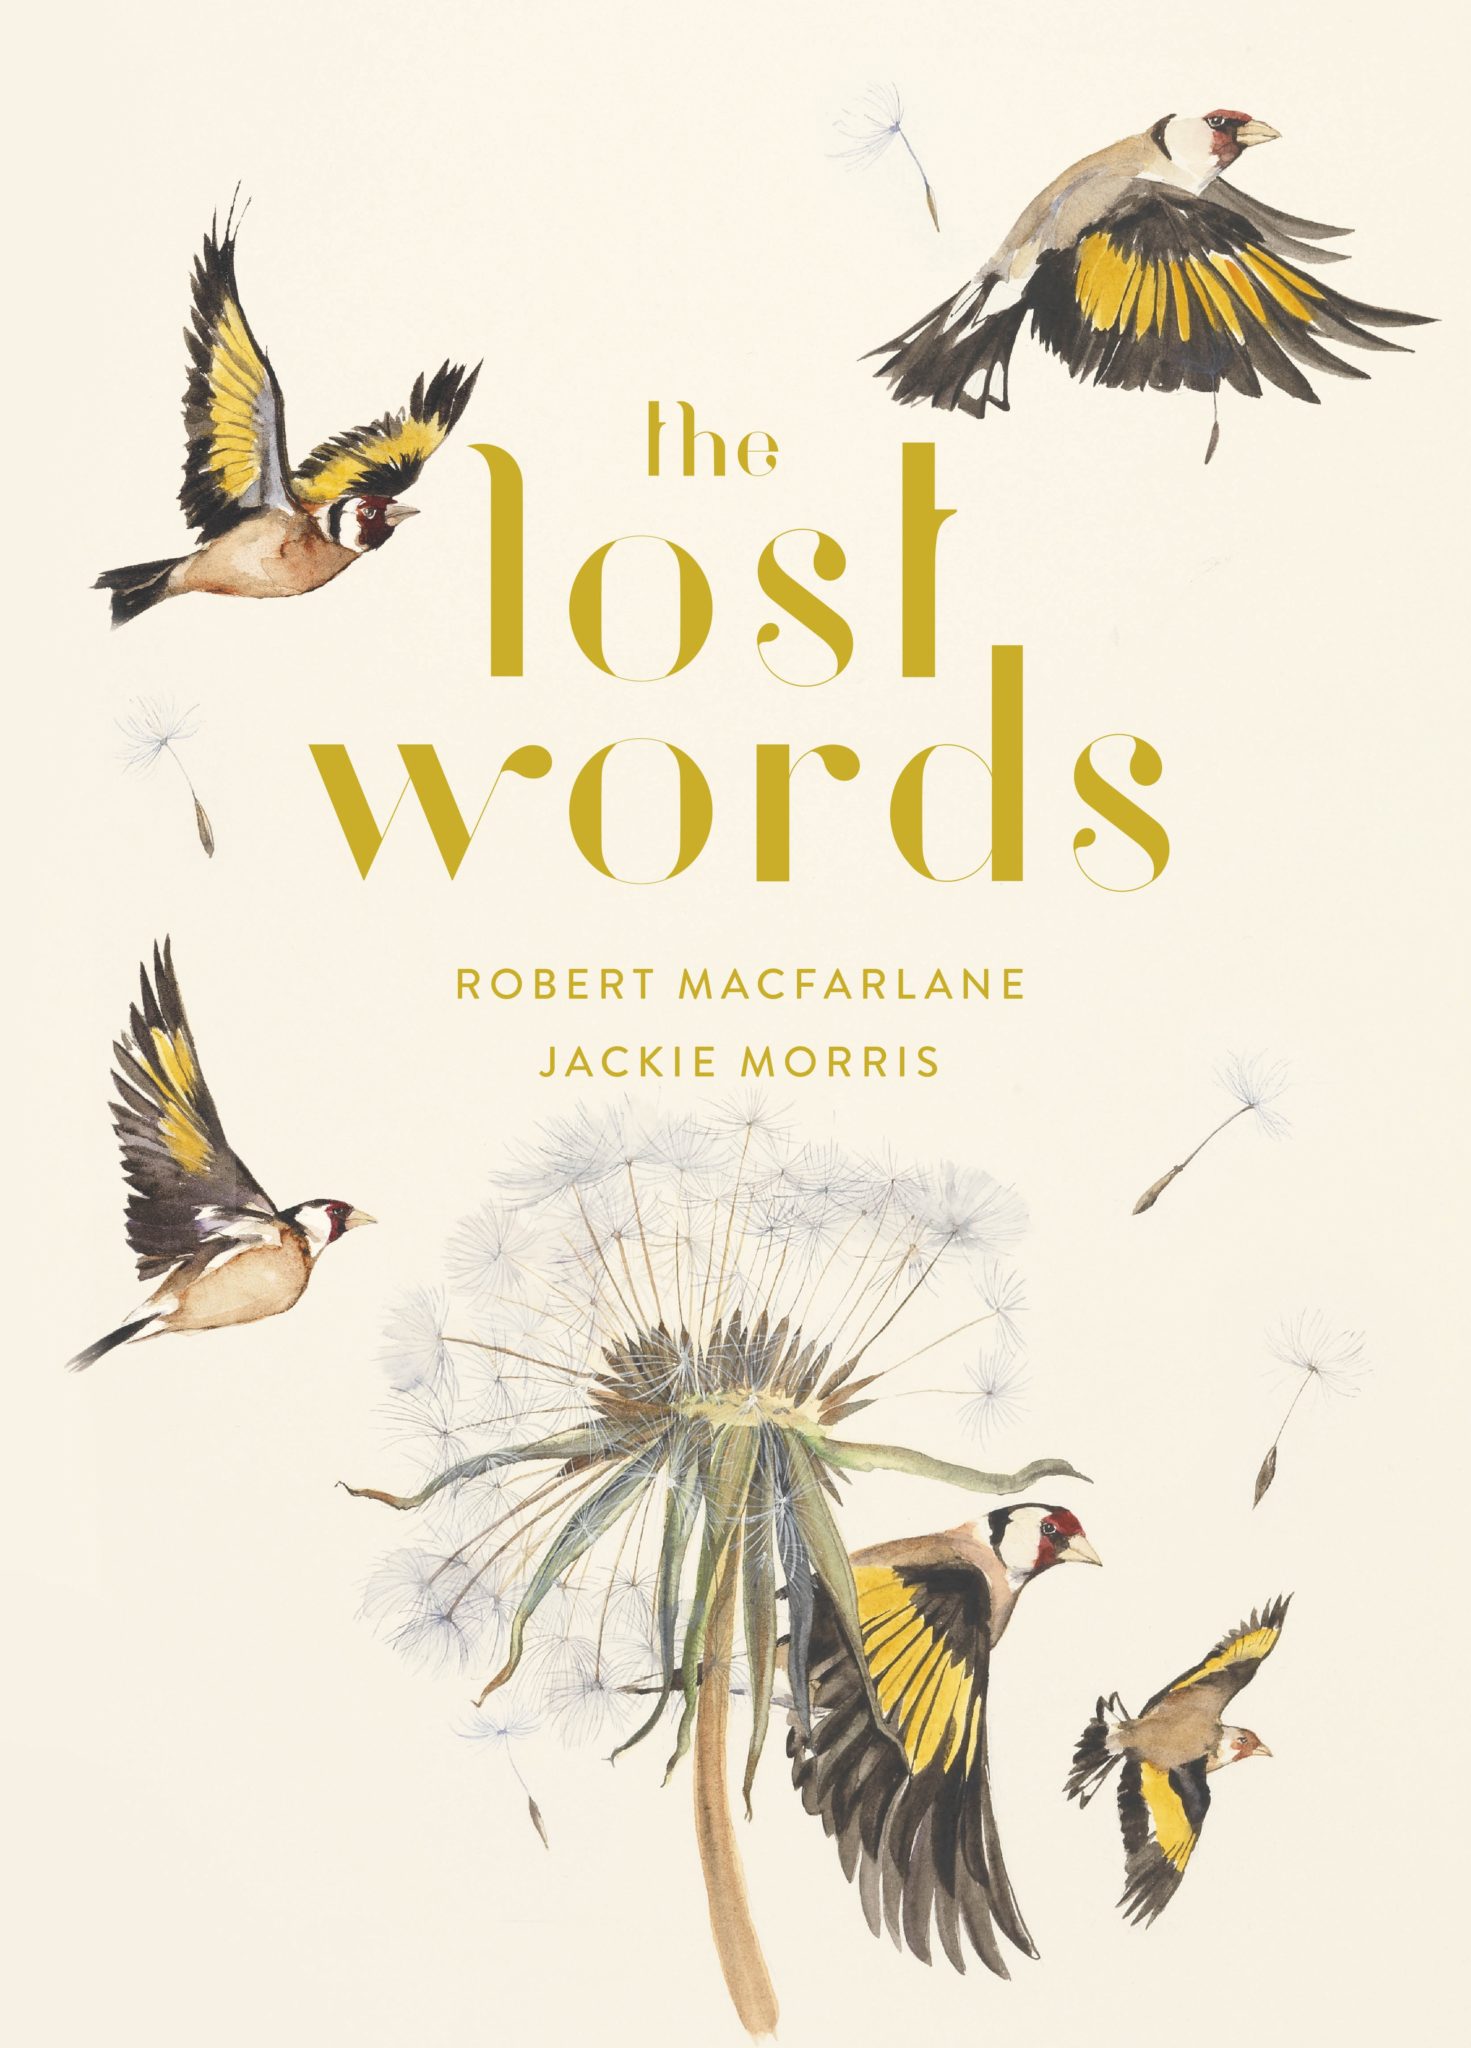 The Lost Words competition for National Poetry Day 2022 